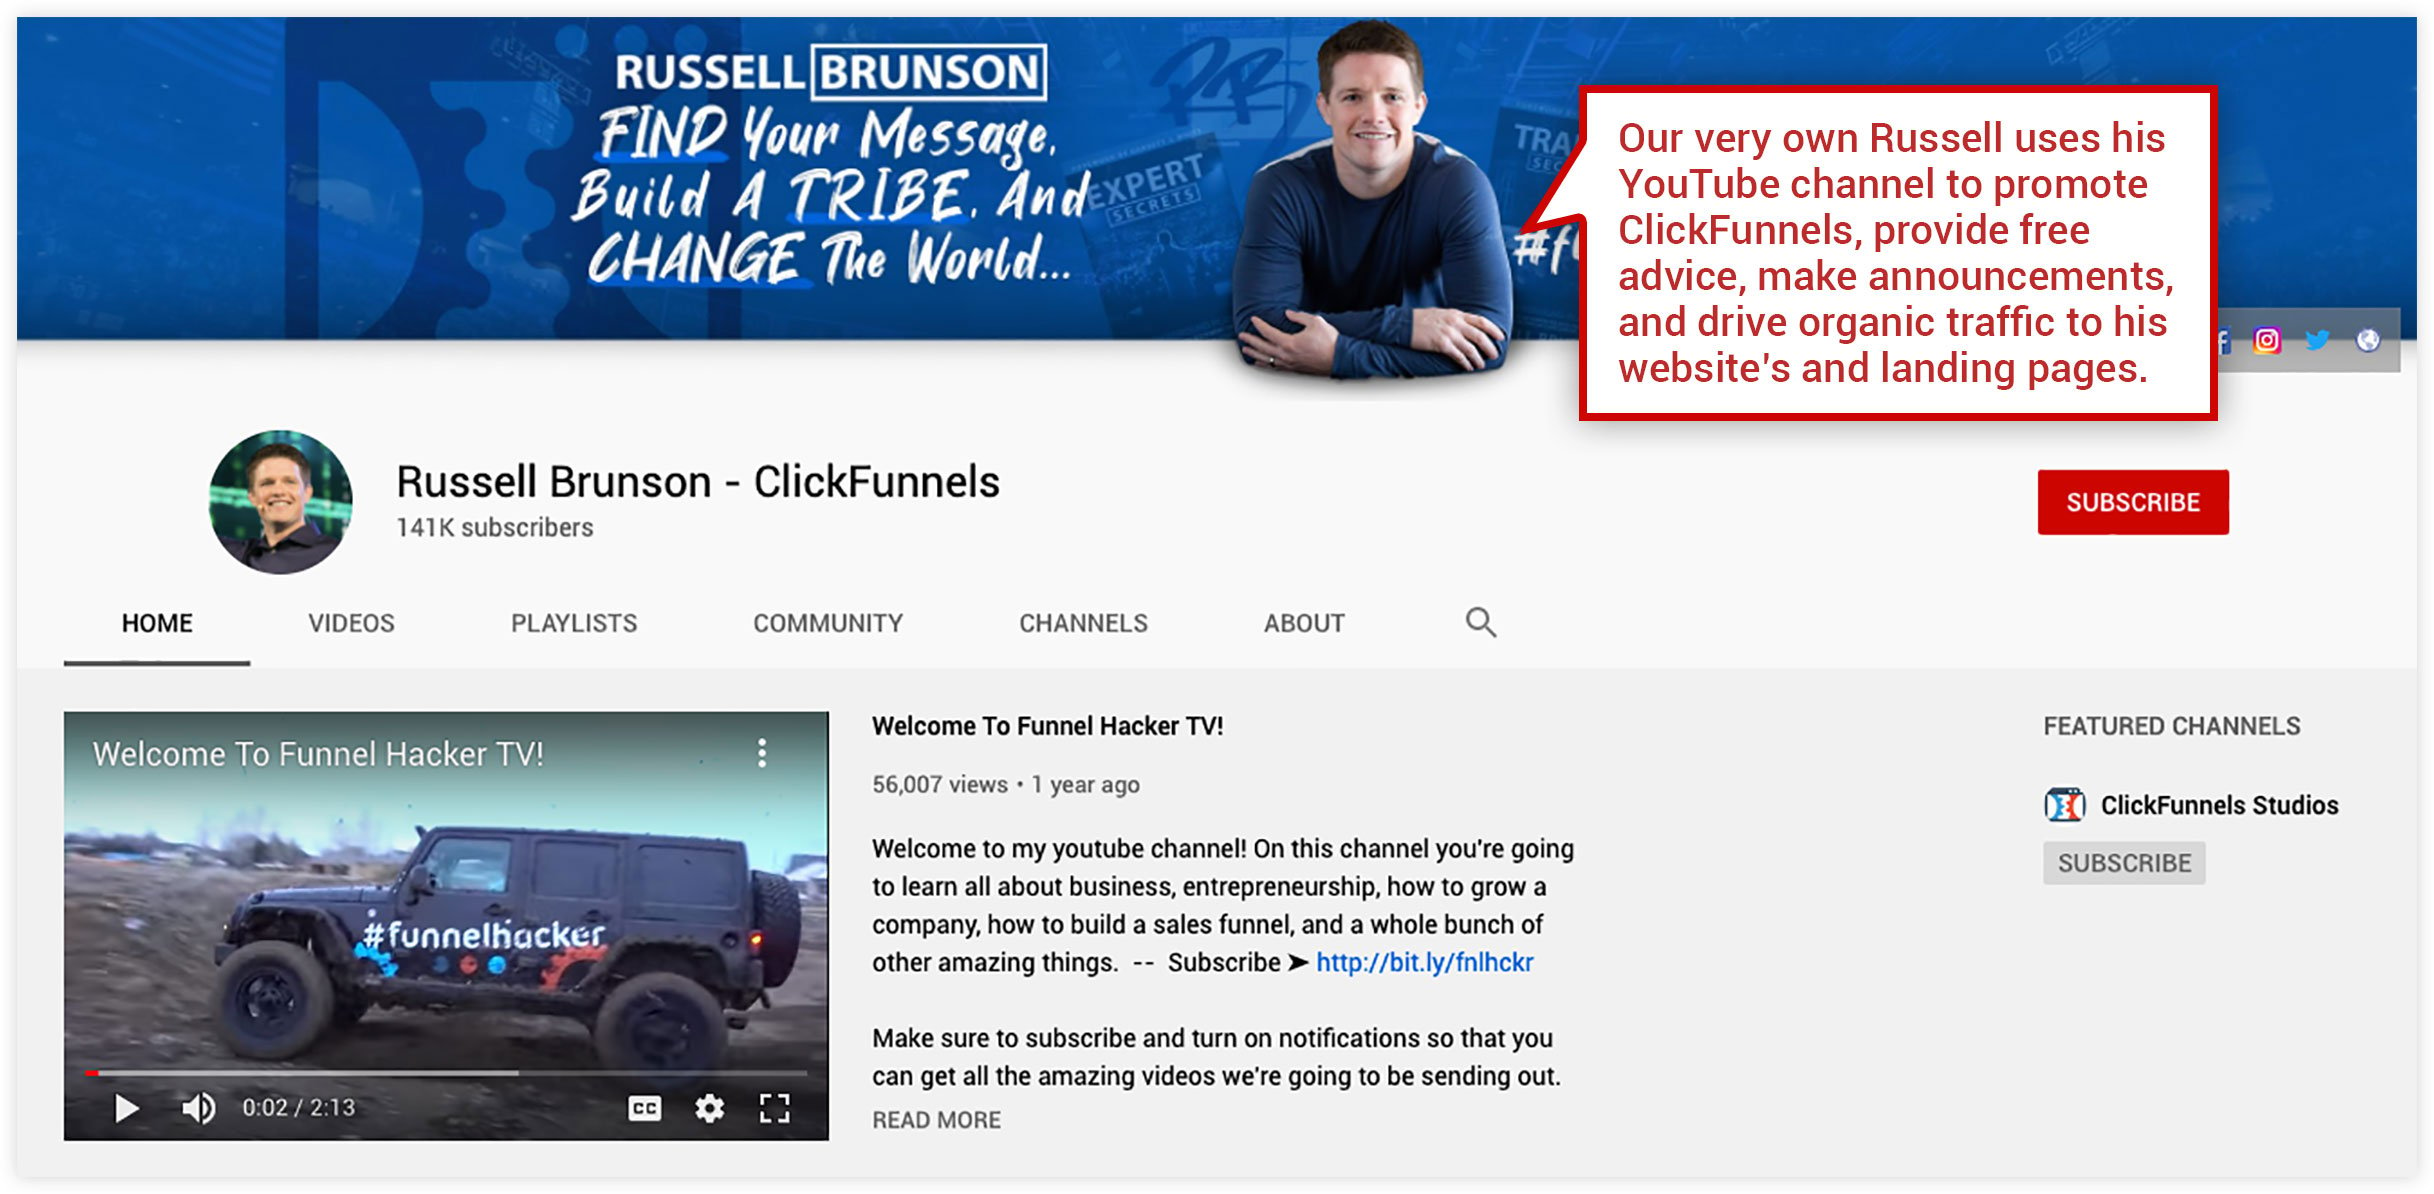 Canale YouTube ClickFunnels